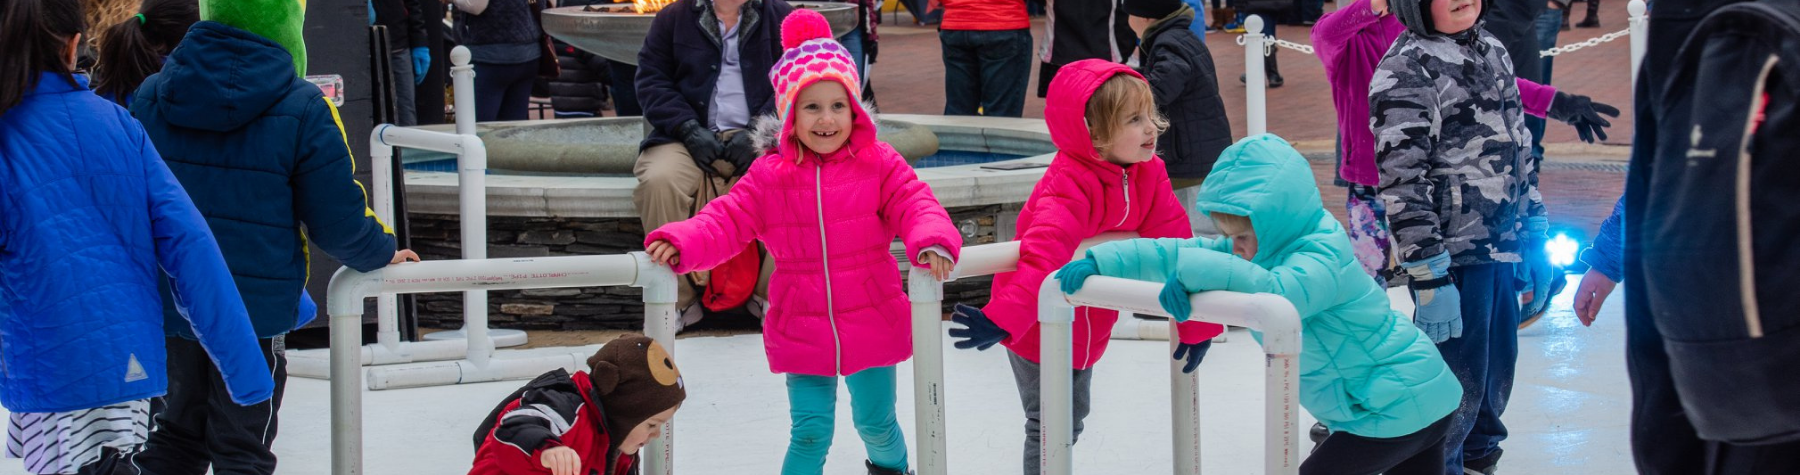 Ice carvers and ice skating to highlight annual winter festival Saturday in Leesburg